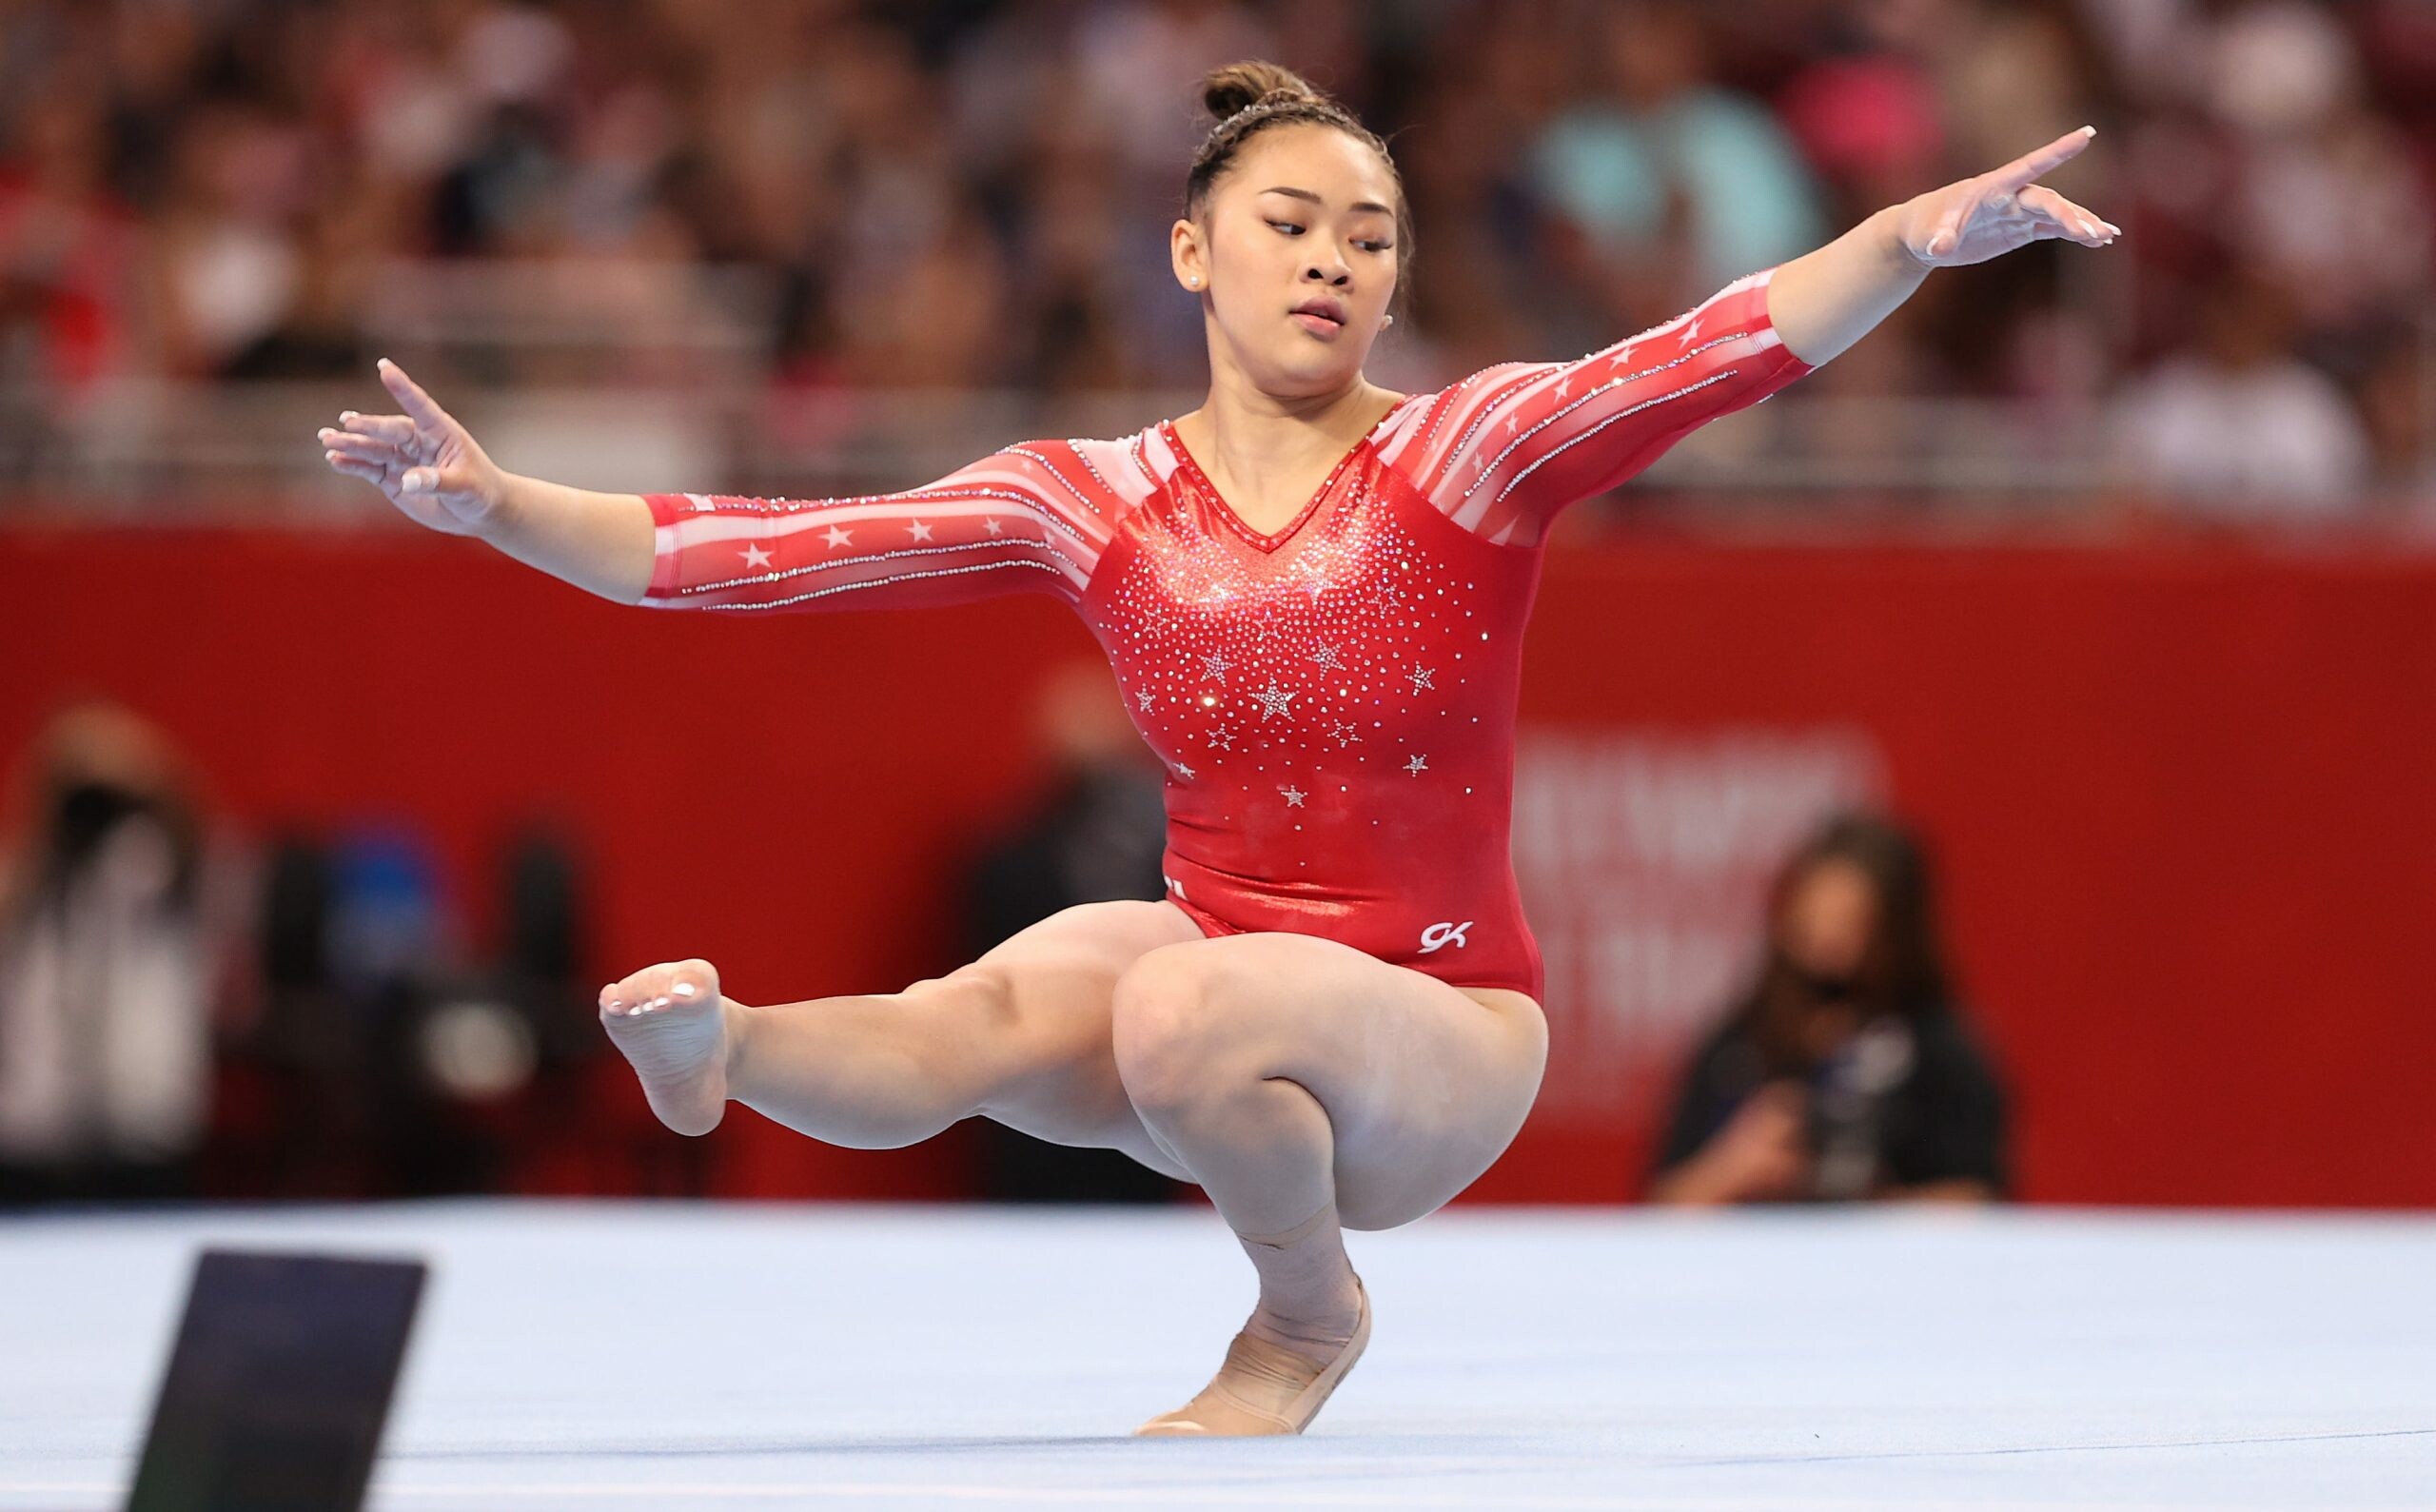 Sunisa Lee: She made the junior national team in 2017, A Hmong American artistic gymnast. 2560x1590 HD Background.